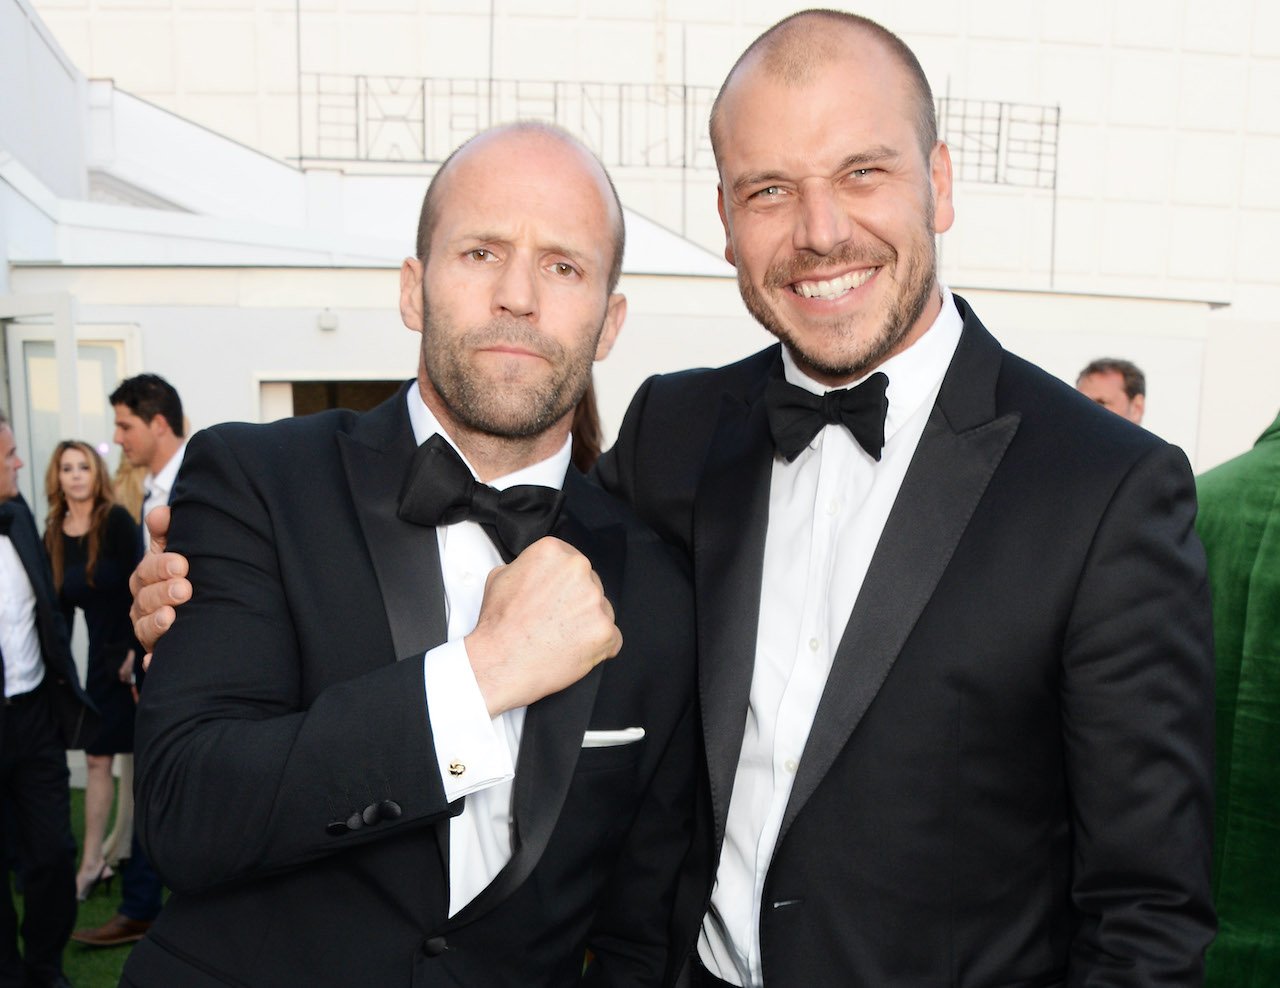 Jason Statham (L) and director Patrick Hughes attend "The Expendables 3" private dinner and party at Gotha Night Club